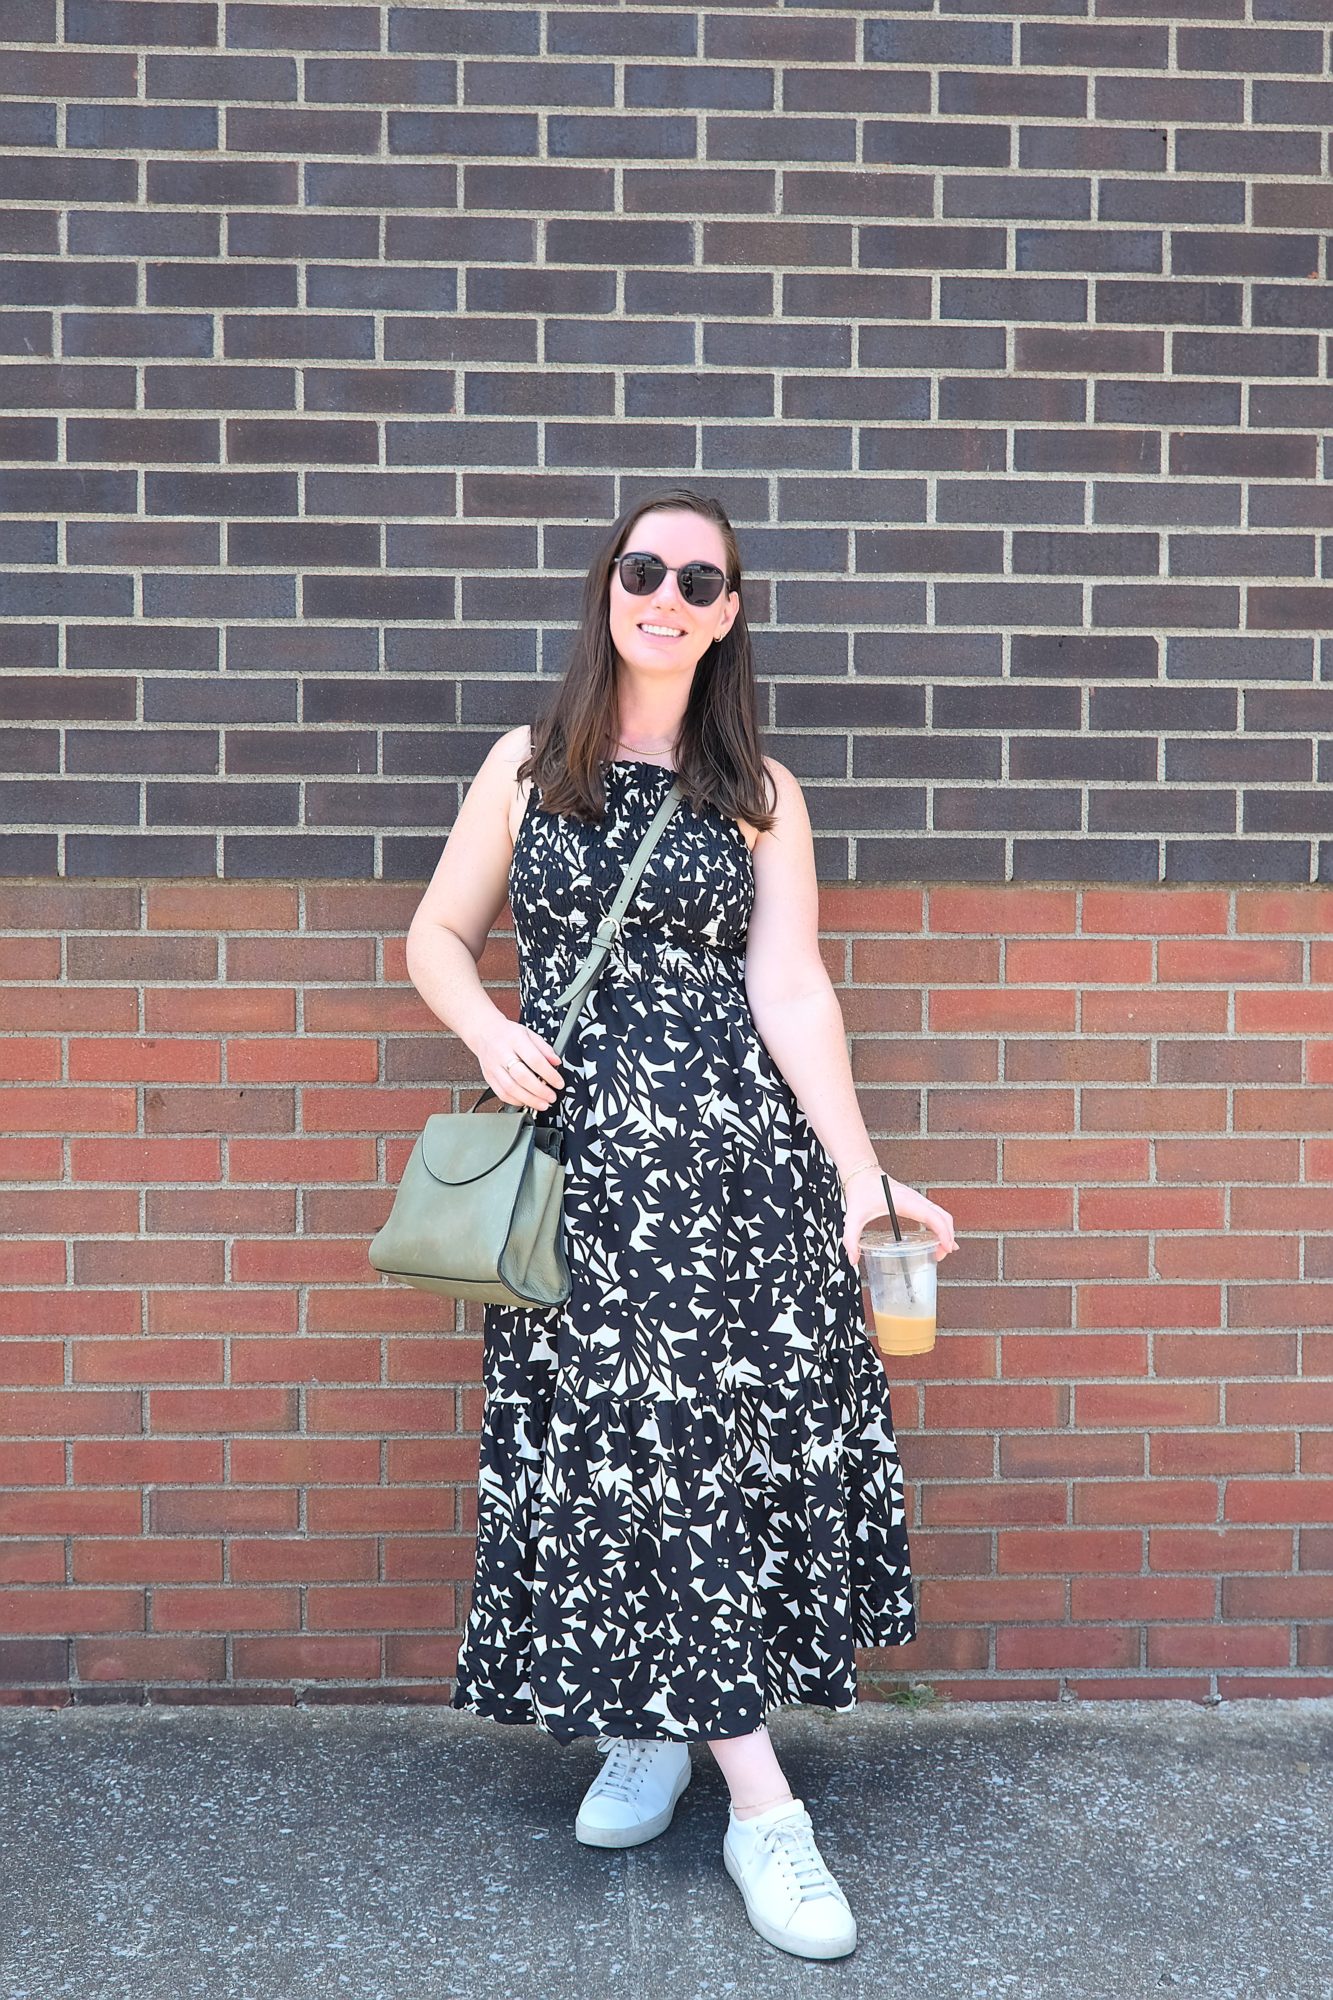 Alyssa stands in front of a brick wall wearing a midi dress and sneakers